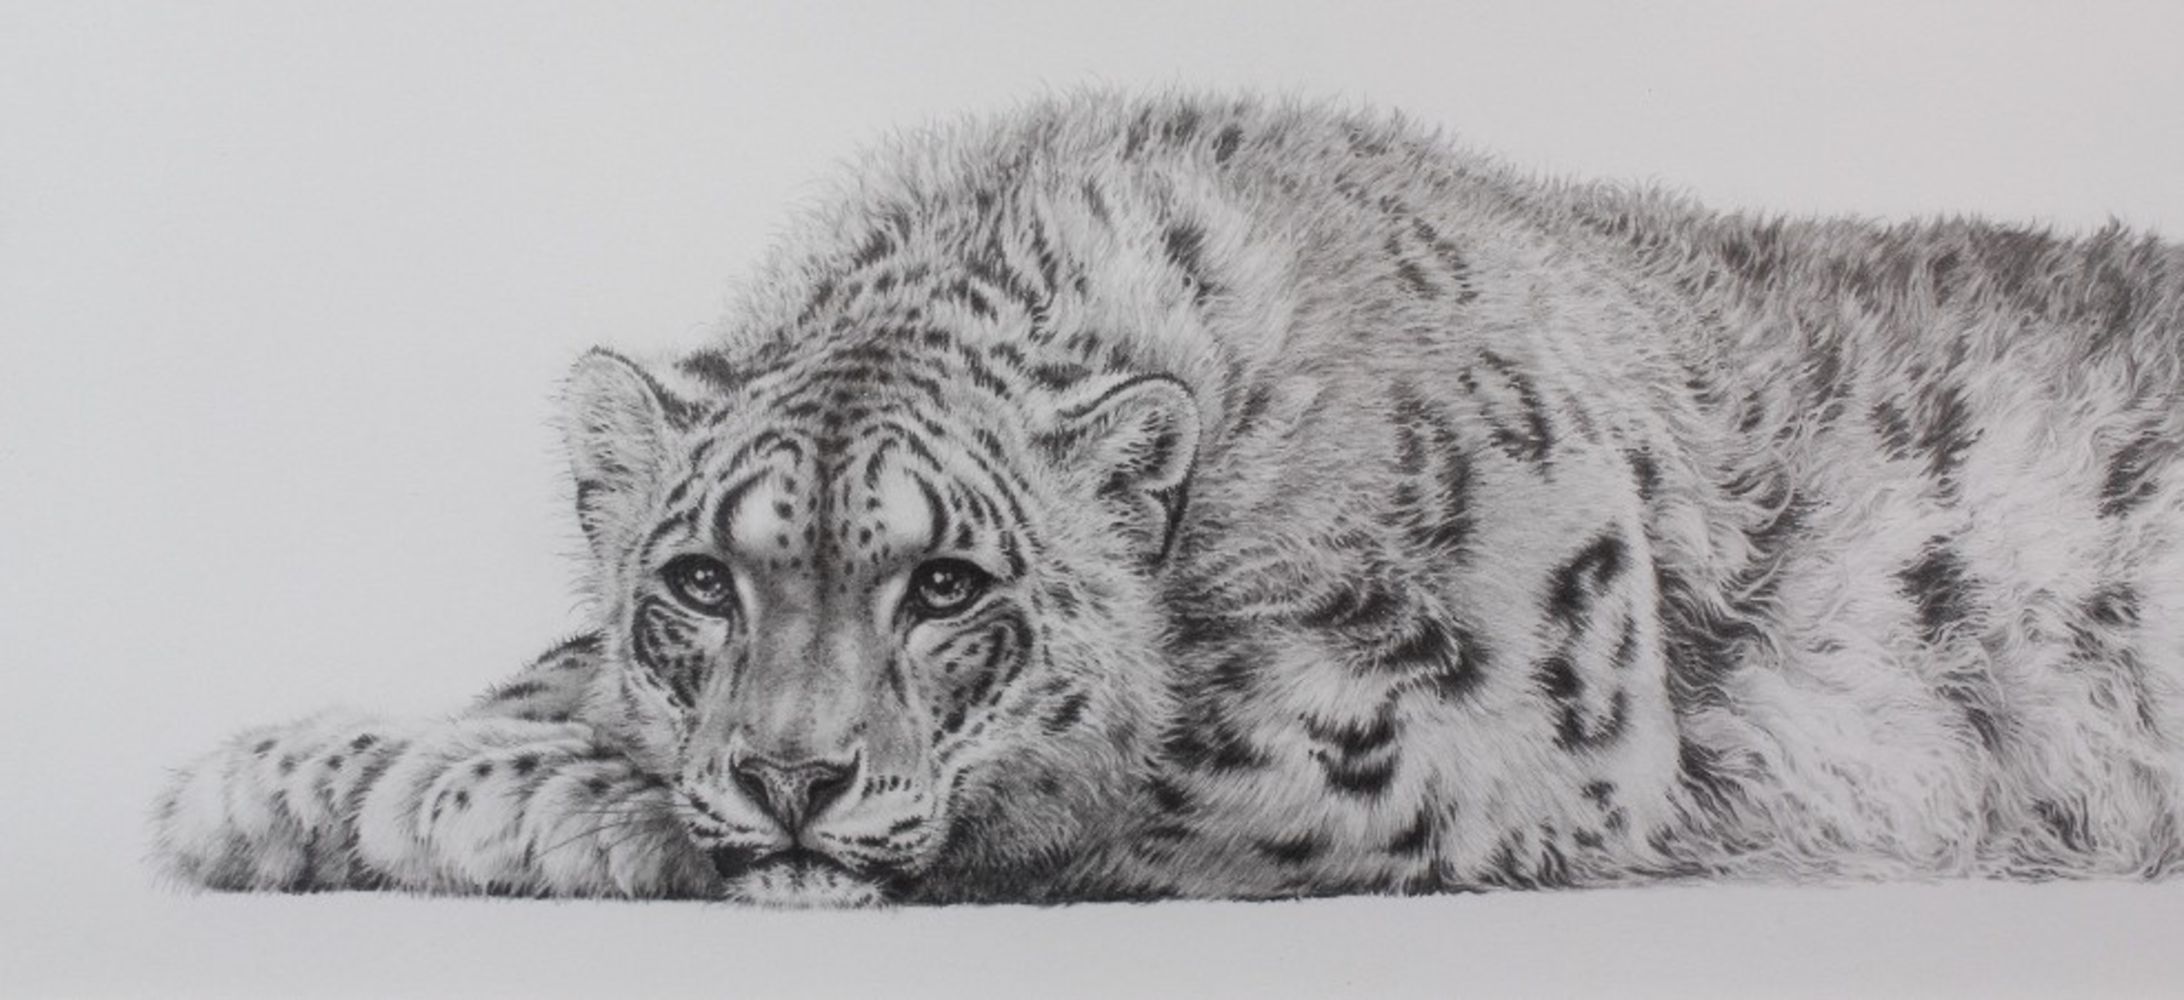 Antiques, Collectables, Jewellery & Wildlife Art Sale